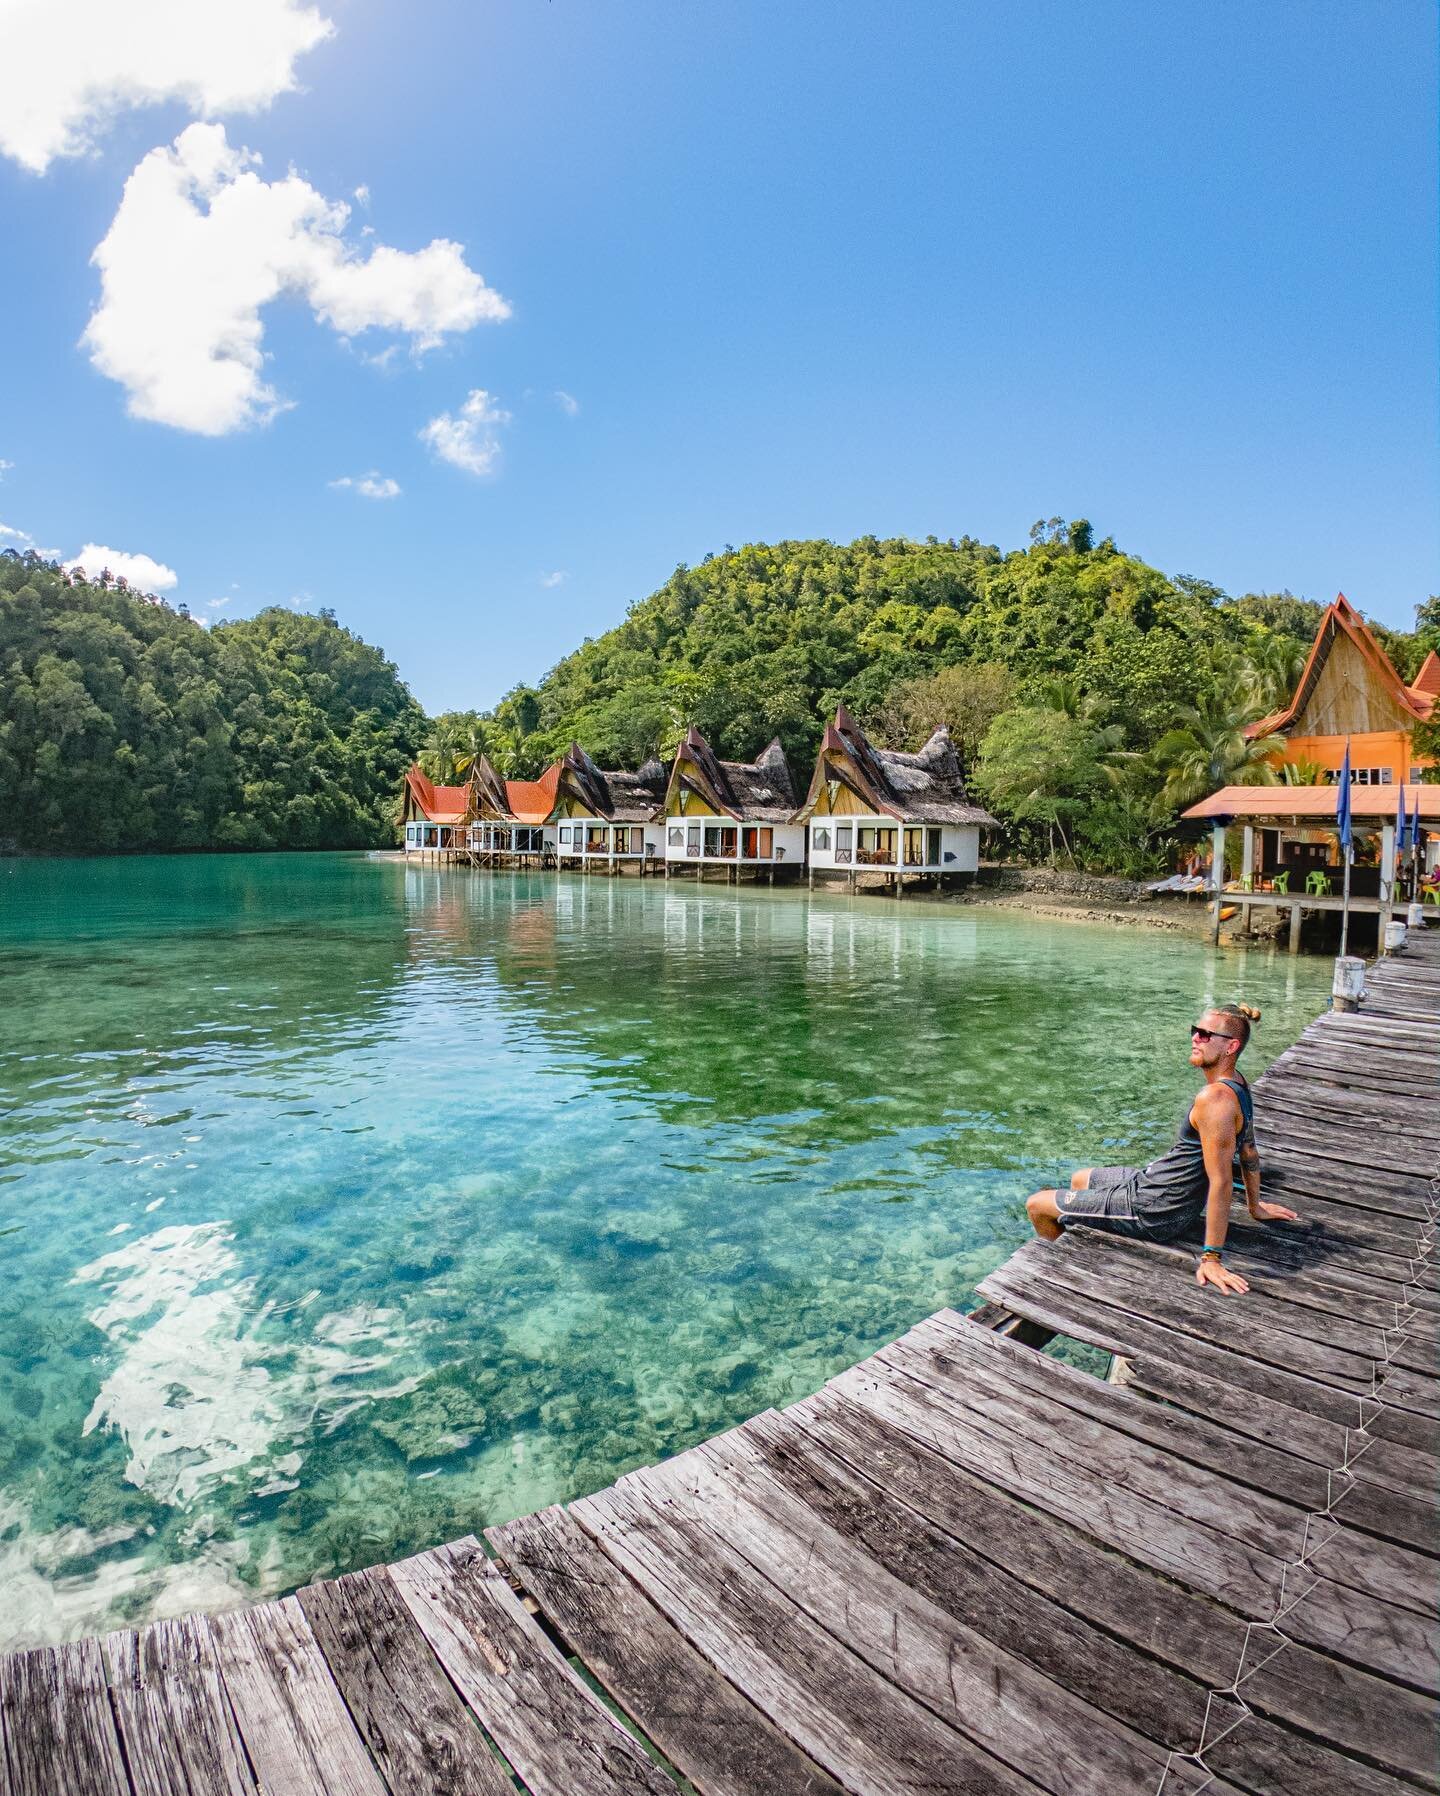 I have to show you a couple more photos from this amazing location! A short getaway from Siargao Island (which by the was was rated the nr.1 island in the world) you will find Sohoton Cove. If you ever decide to head this way, Club Tara will probably